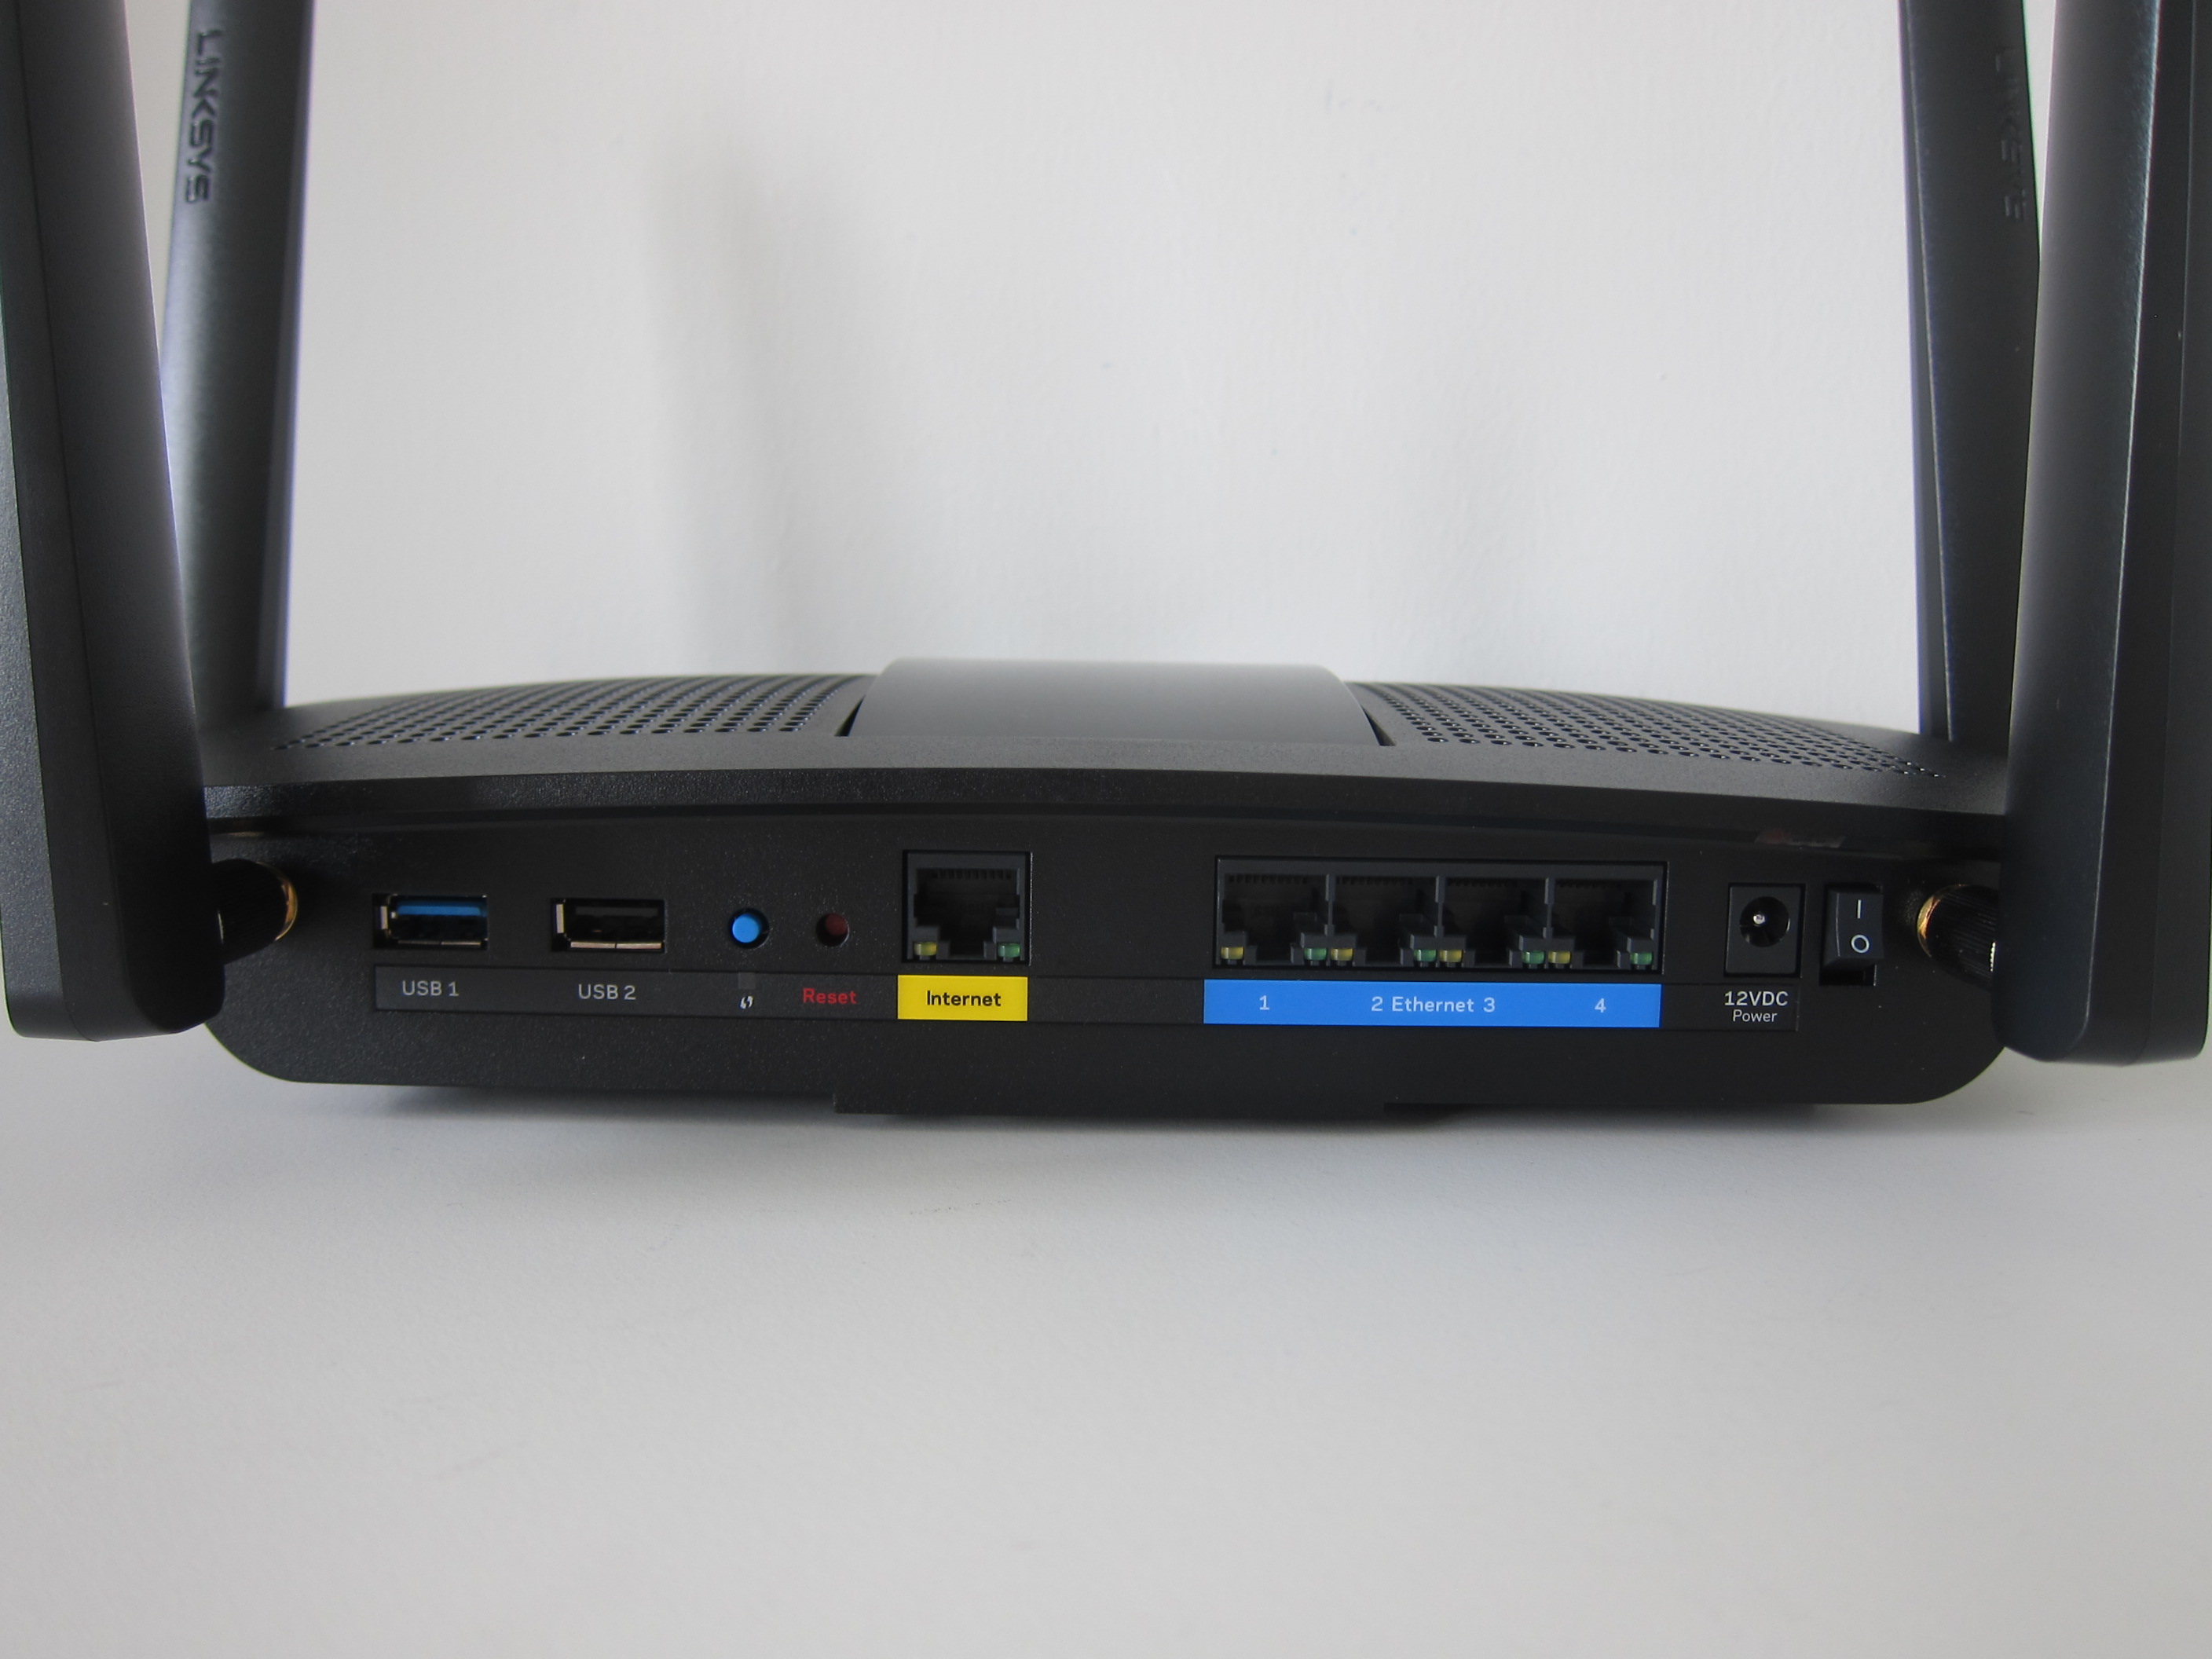 Linksys EA8100 Max-Stream AC2600 MU-MIMO Gigabit Router Review 